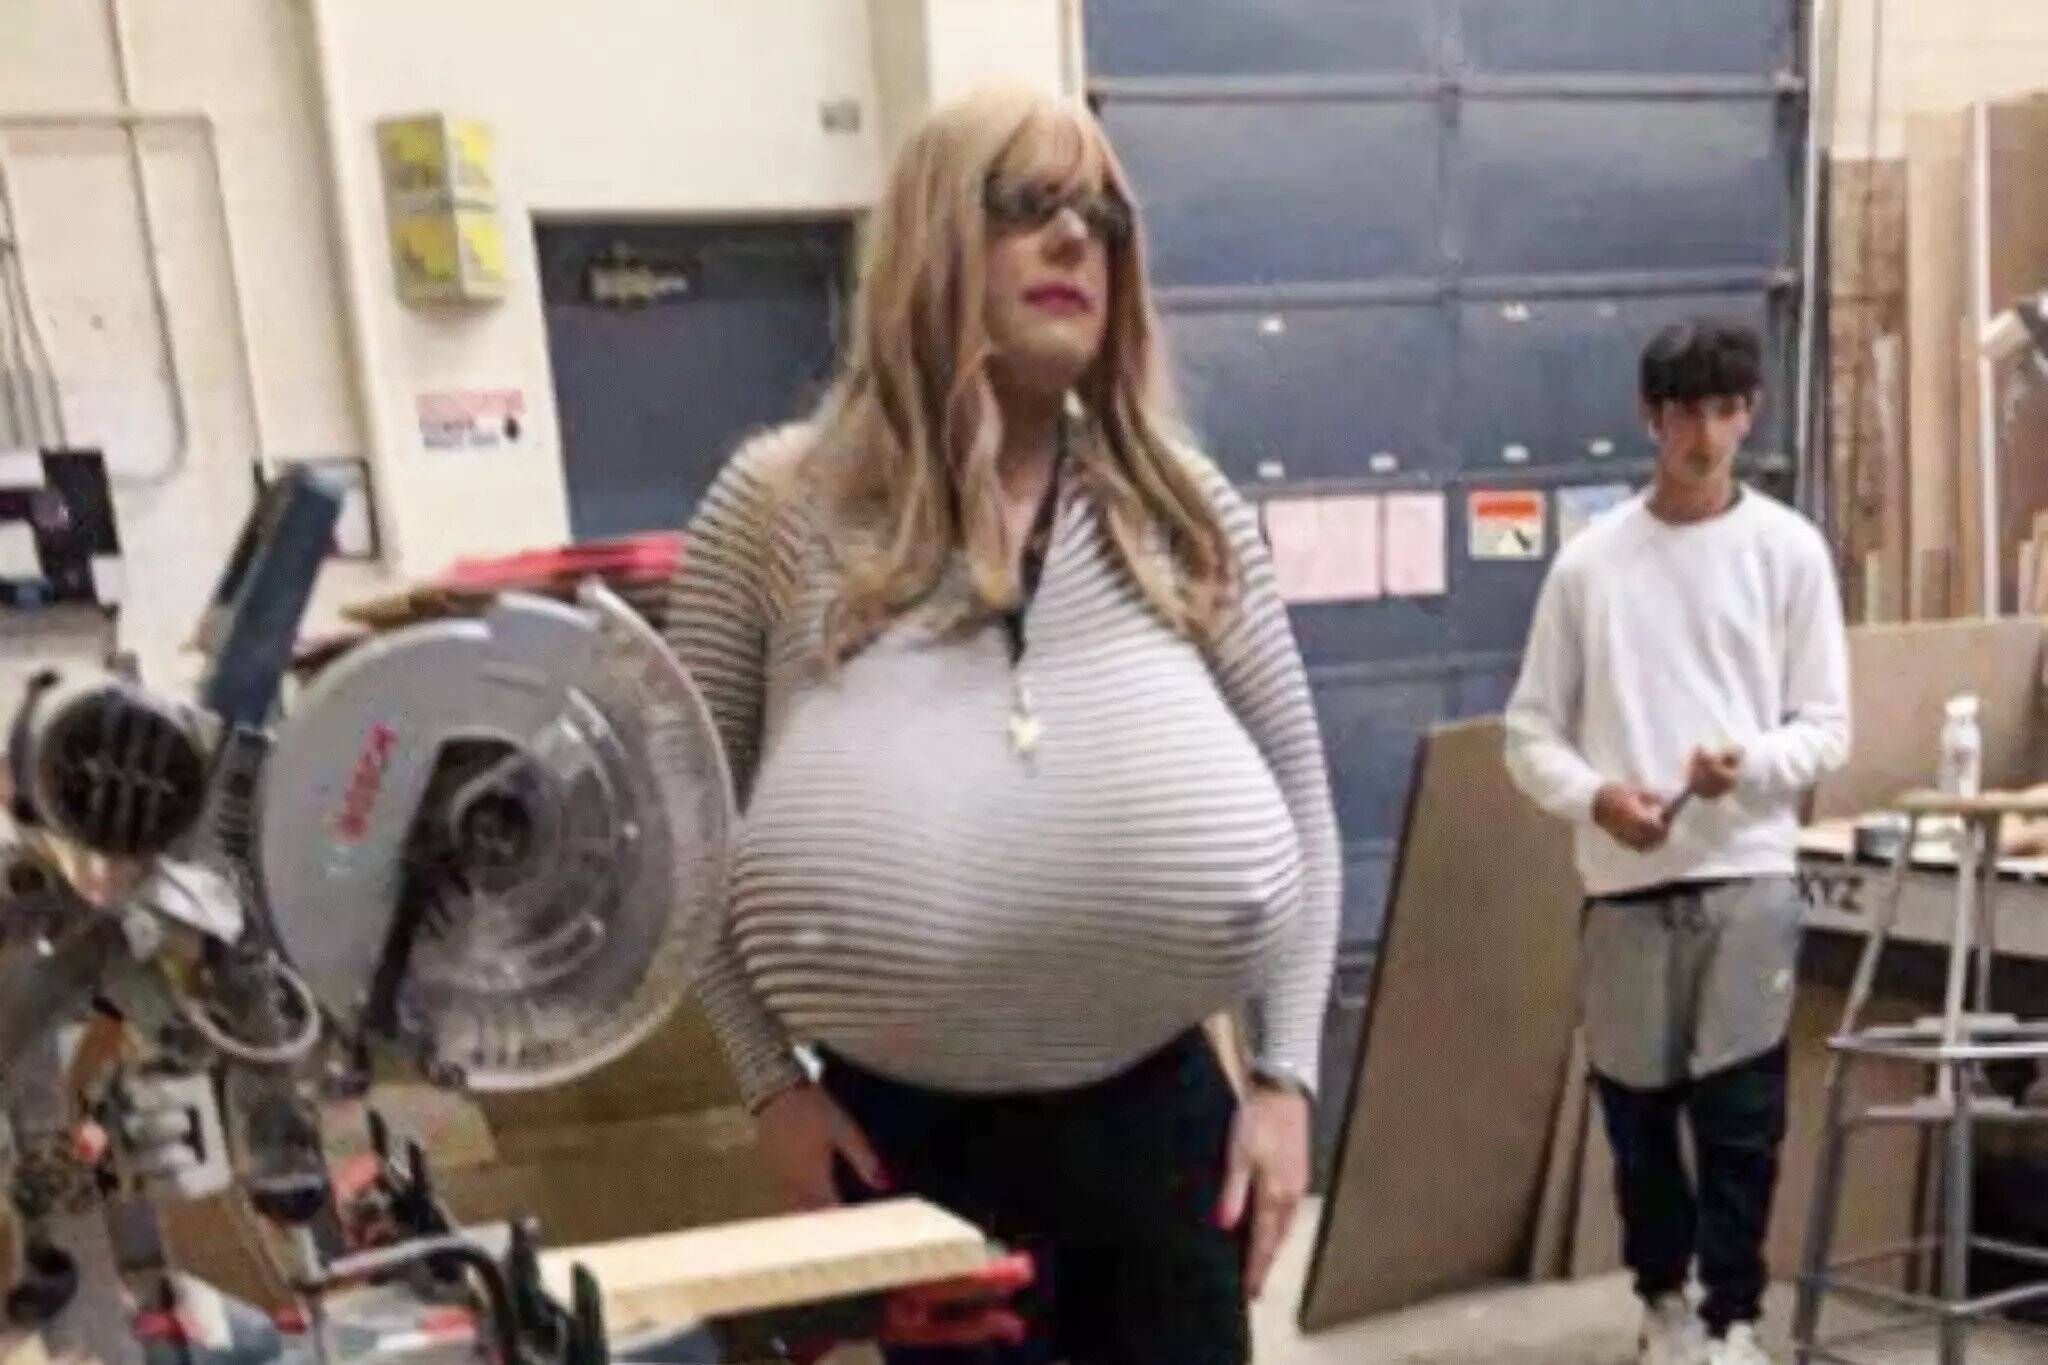 Big Tits In High School - Students warned not to take photos of Oakville teacher who wears huge  prosthetic breasts